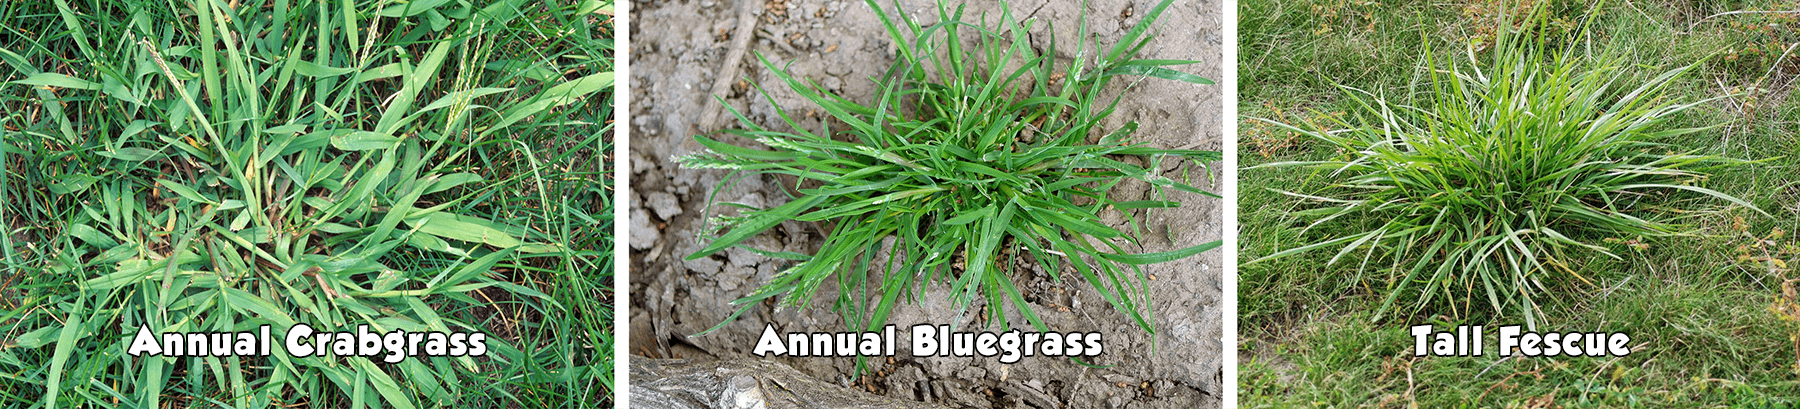 Crabgrass Tall Fescue And Bluegrass Image 